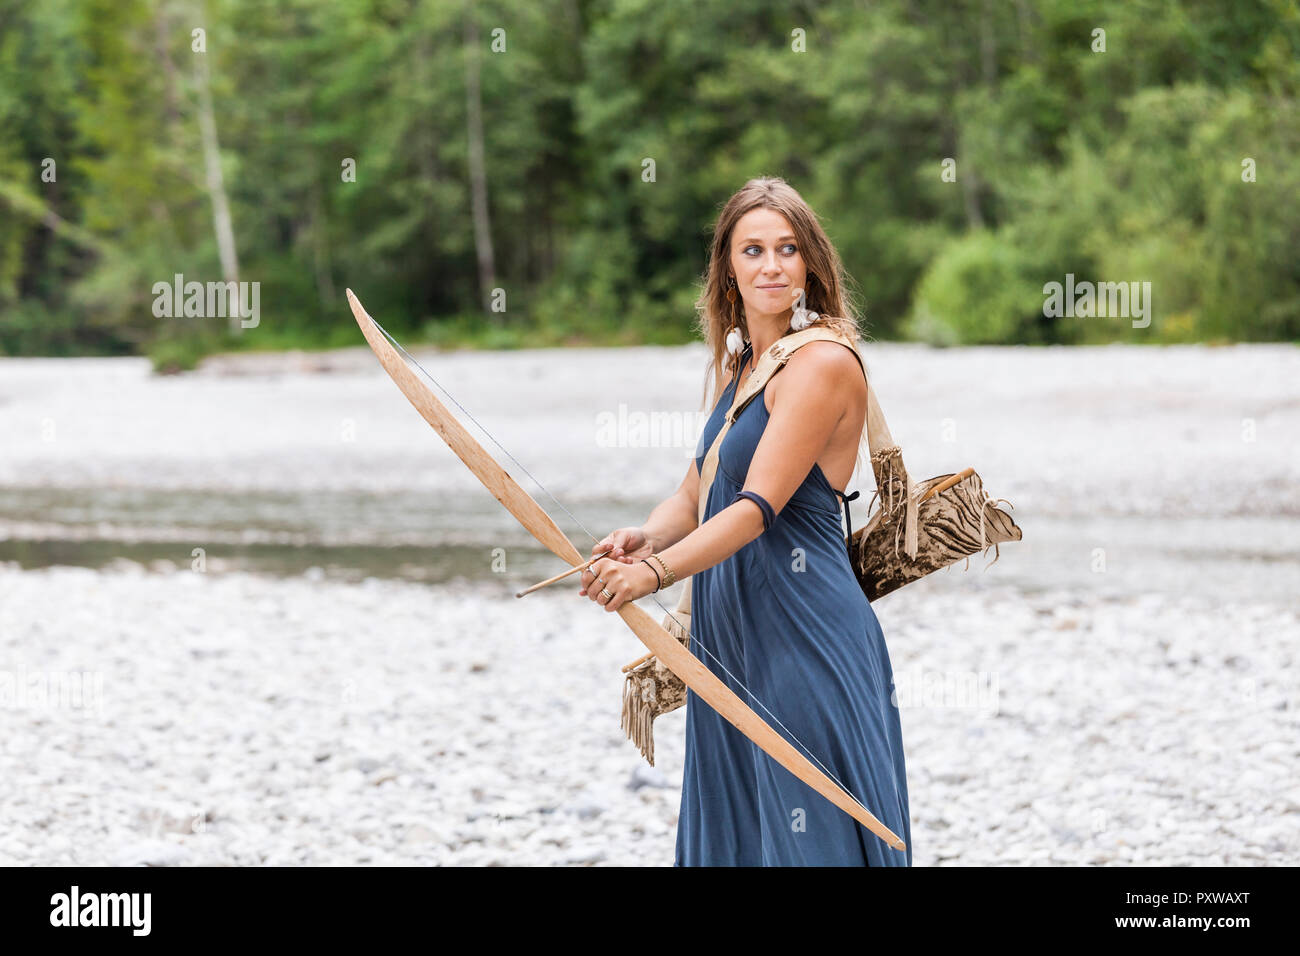 Archeress with bow and arrow in the nature Stock Photo